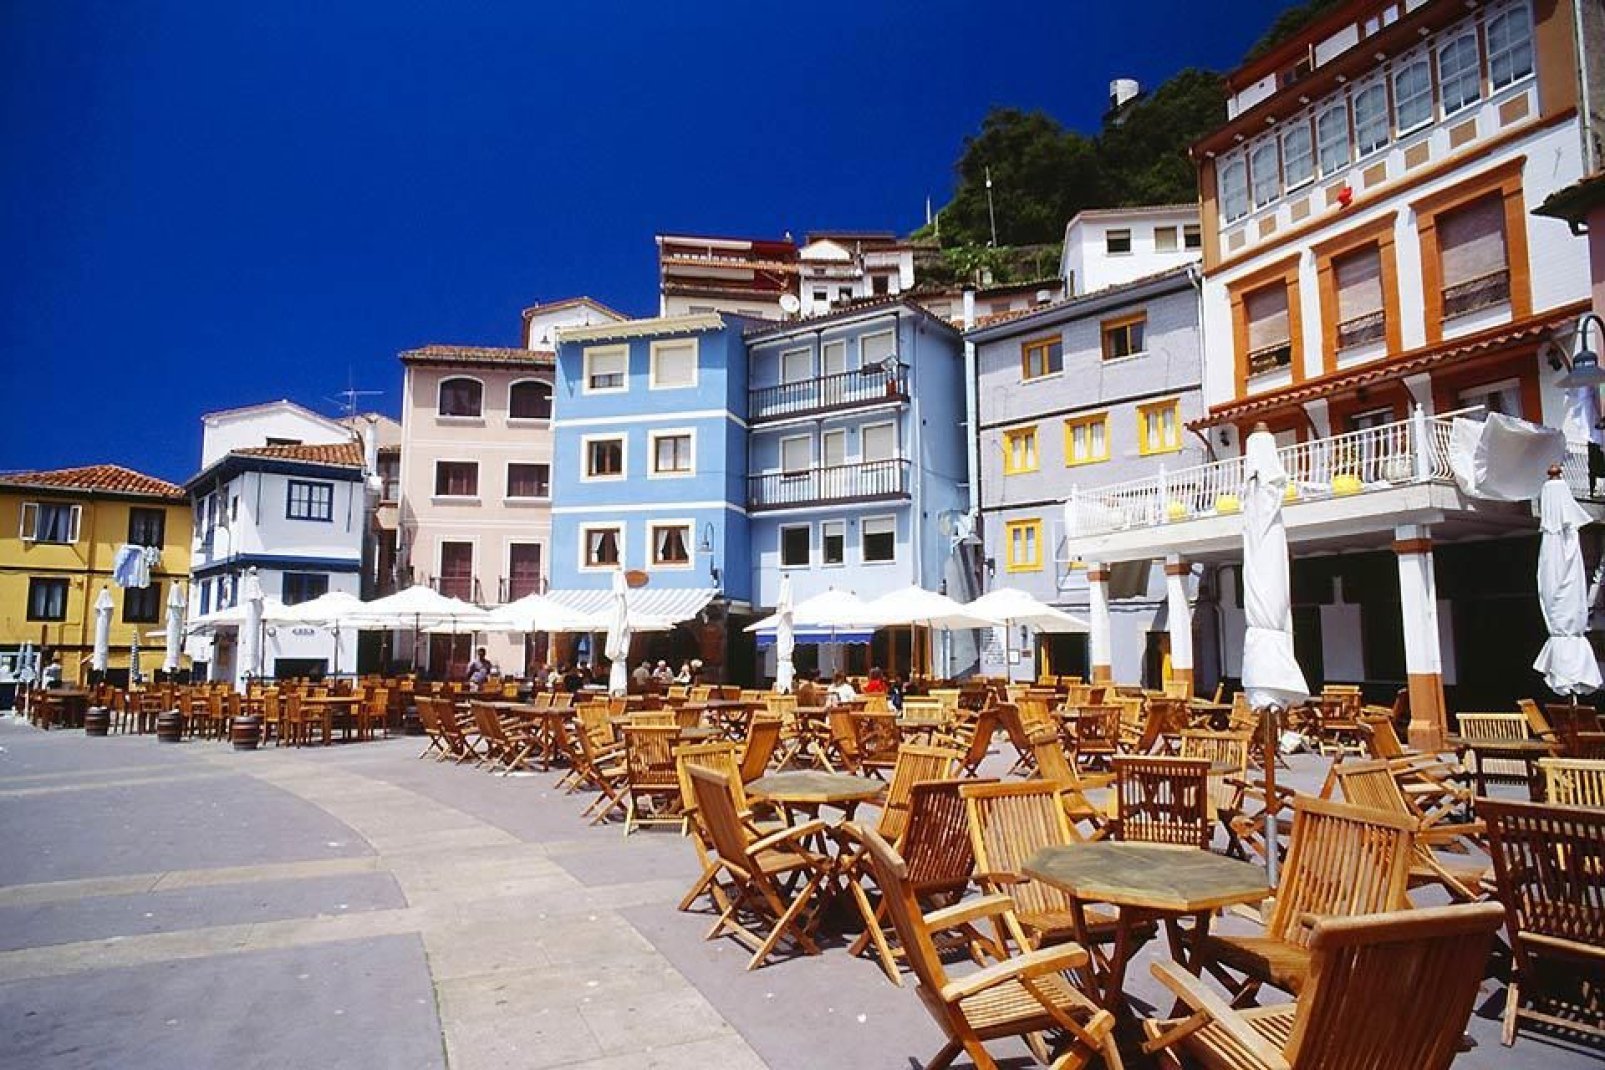 Cudillero is a picturesque little fishing port located on the side of a mountain.